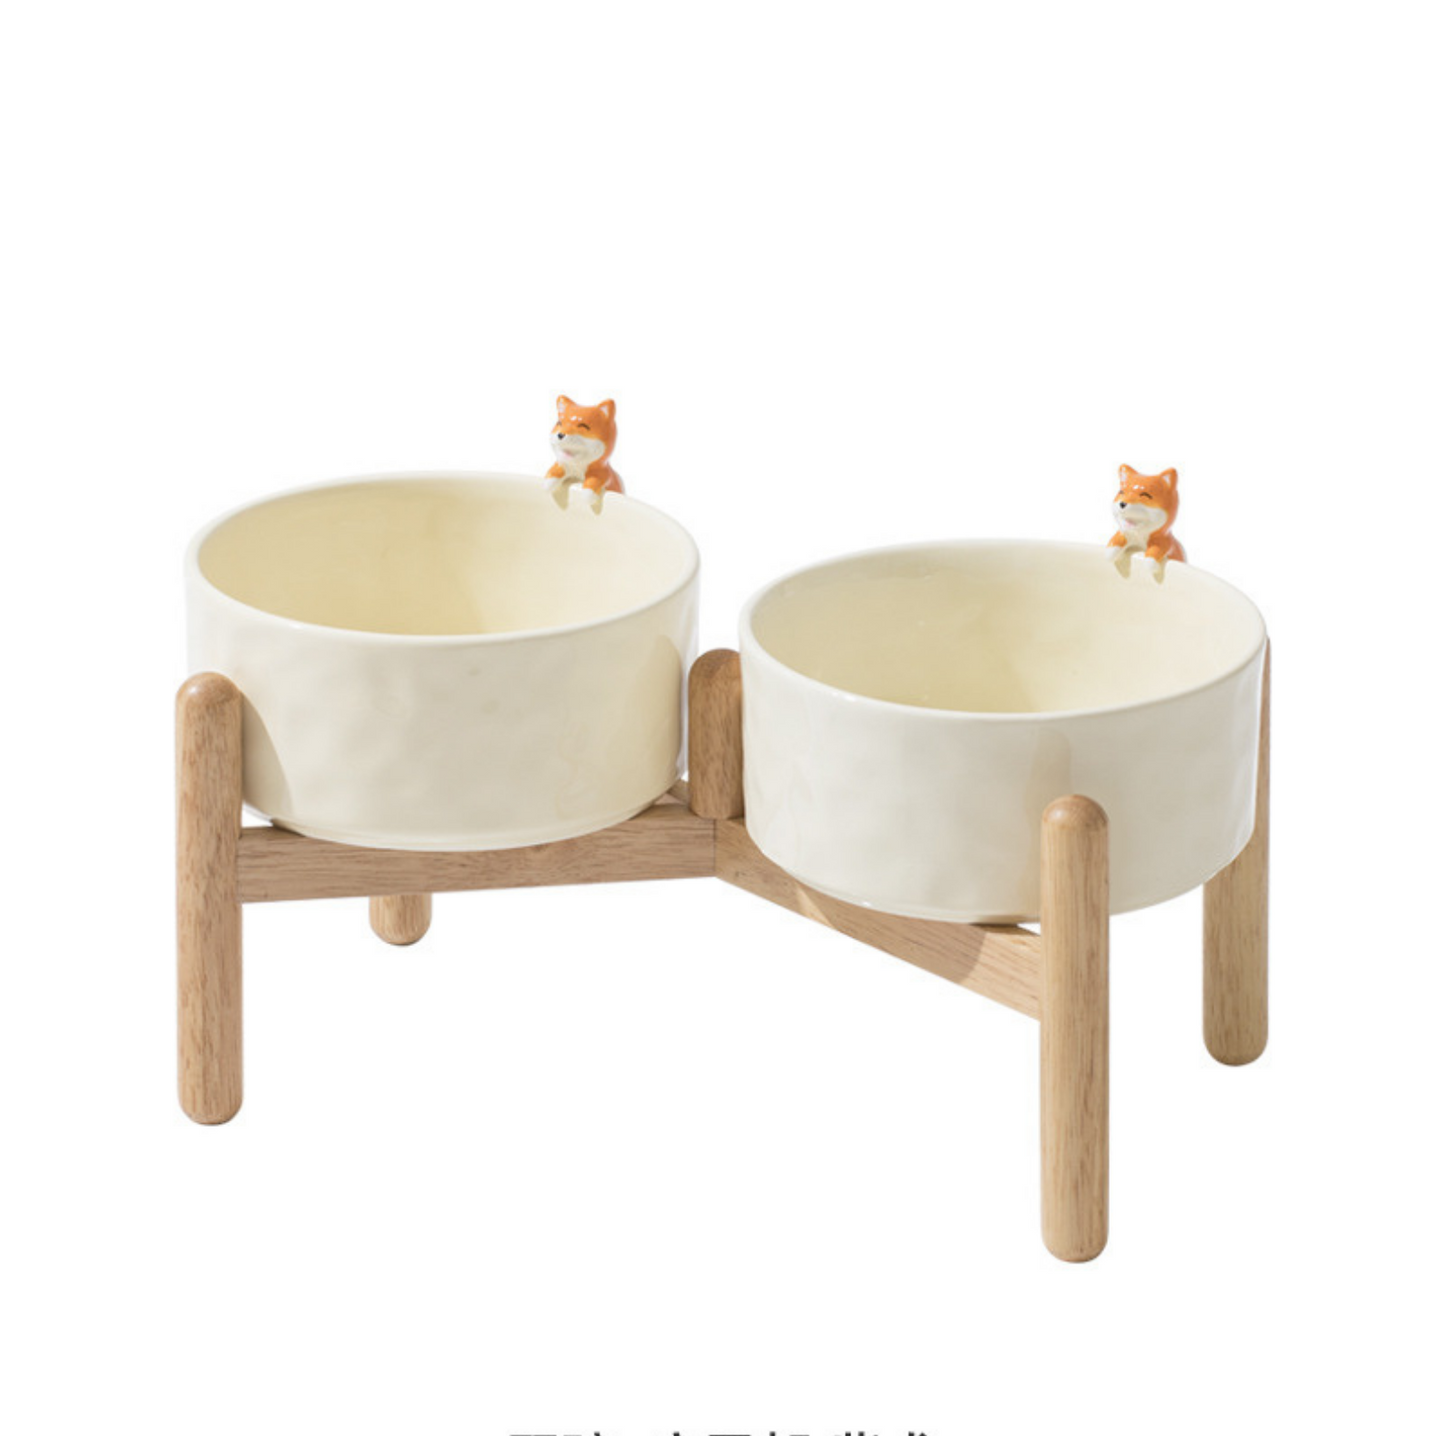 Nordic-style 3D Sculpture Ceramic Cat and Small Dog Bowl